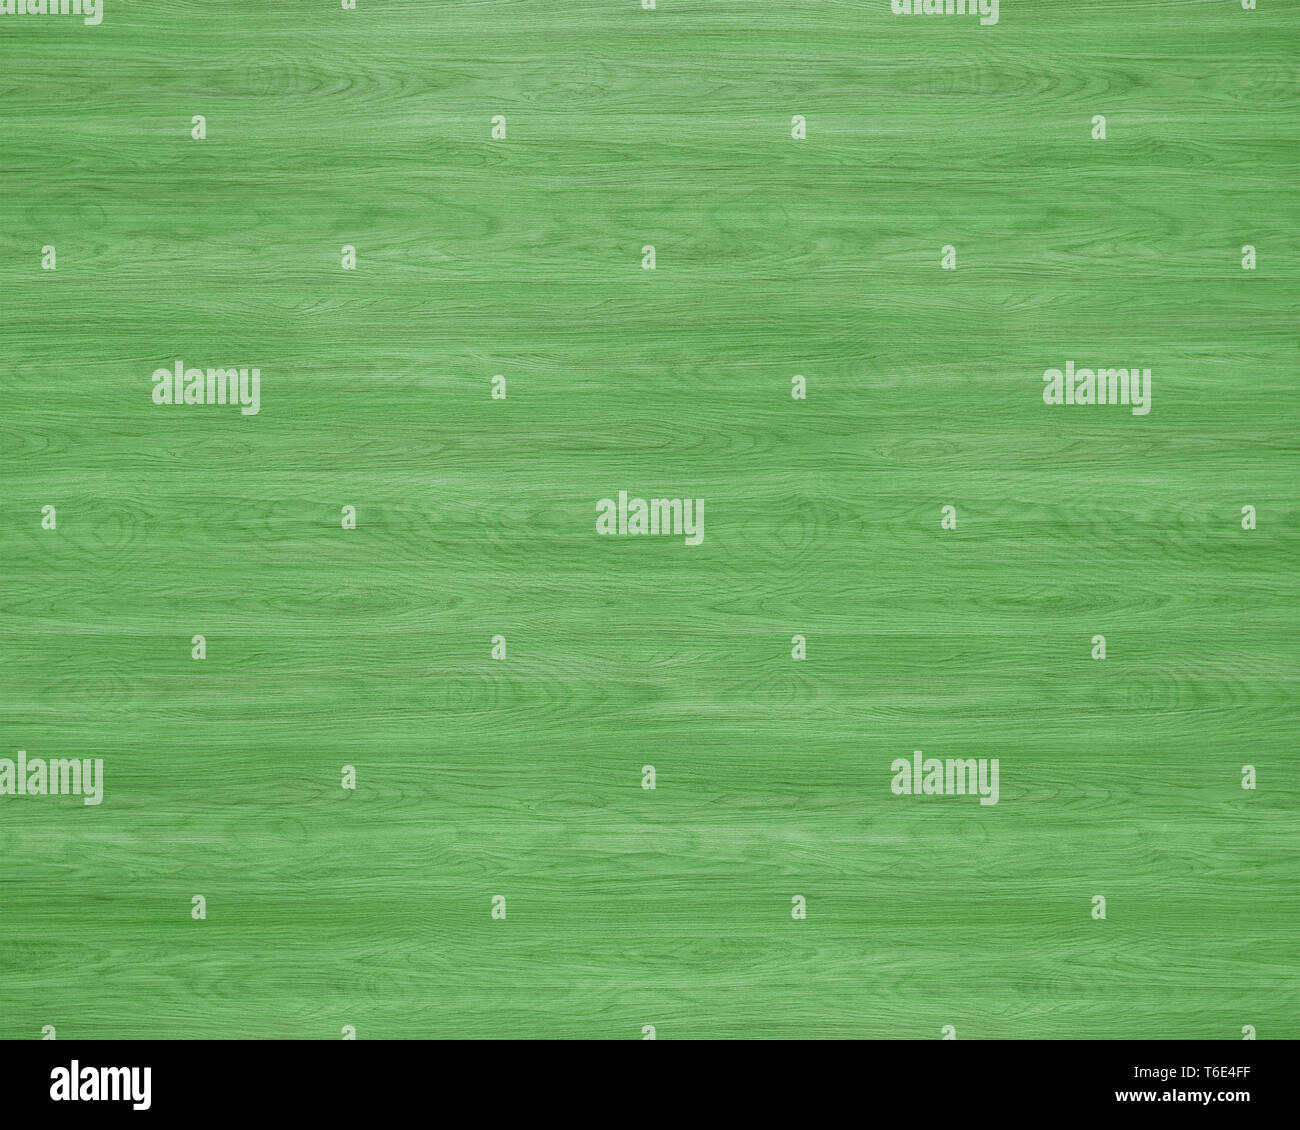 Green colored wood. Green wood texture background. Stock Photo